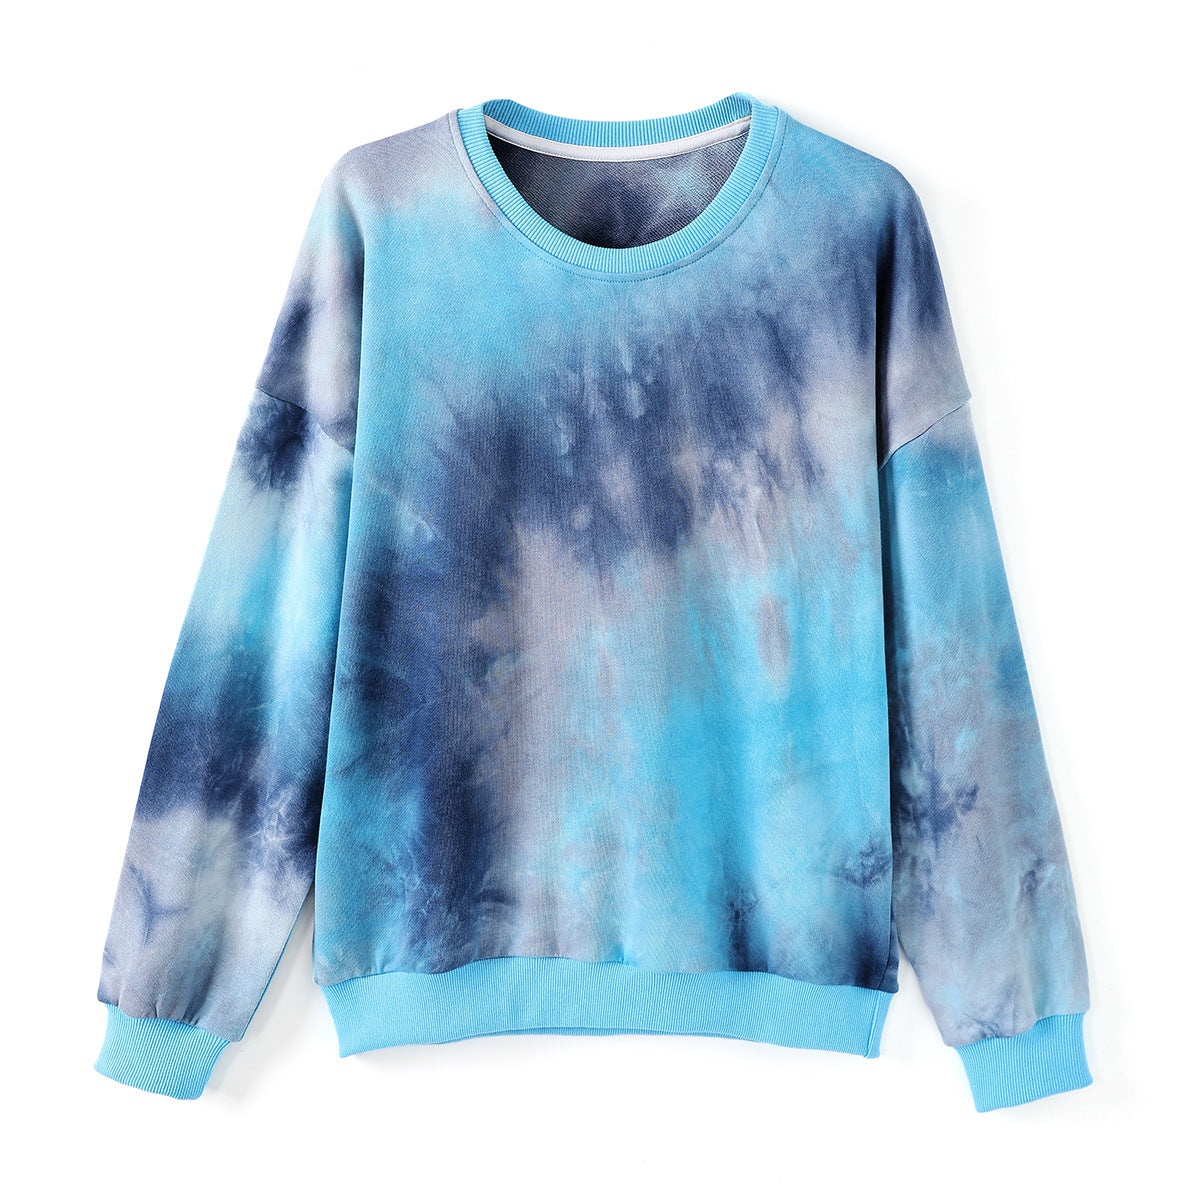 Family Matching Fashion Tie-Dye Father Son Mother Daughter Long-Sleeved Shirts Tops